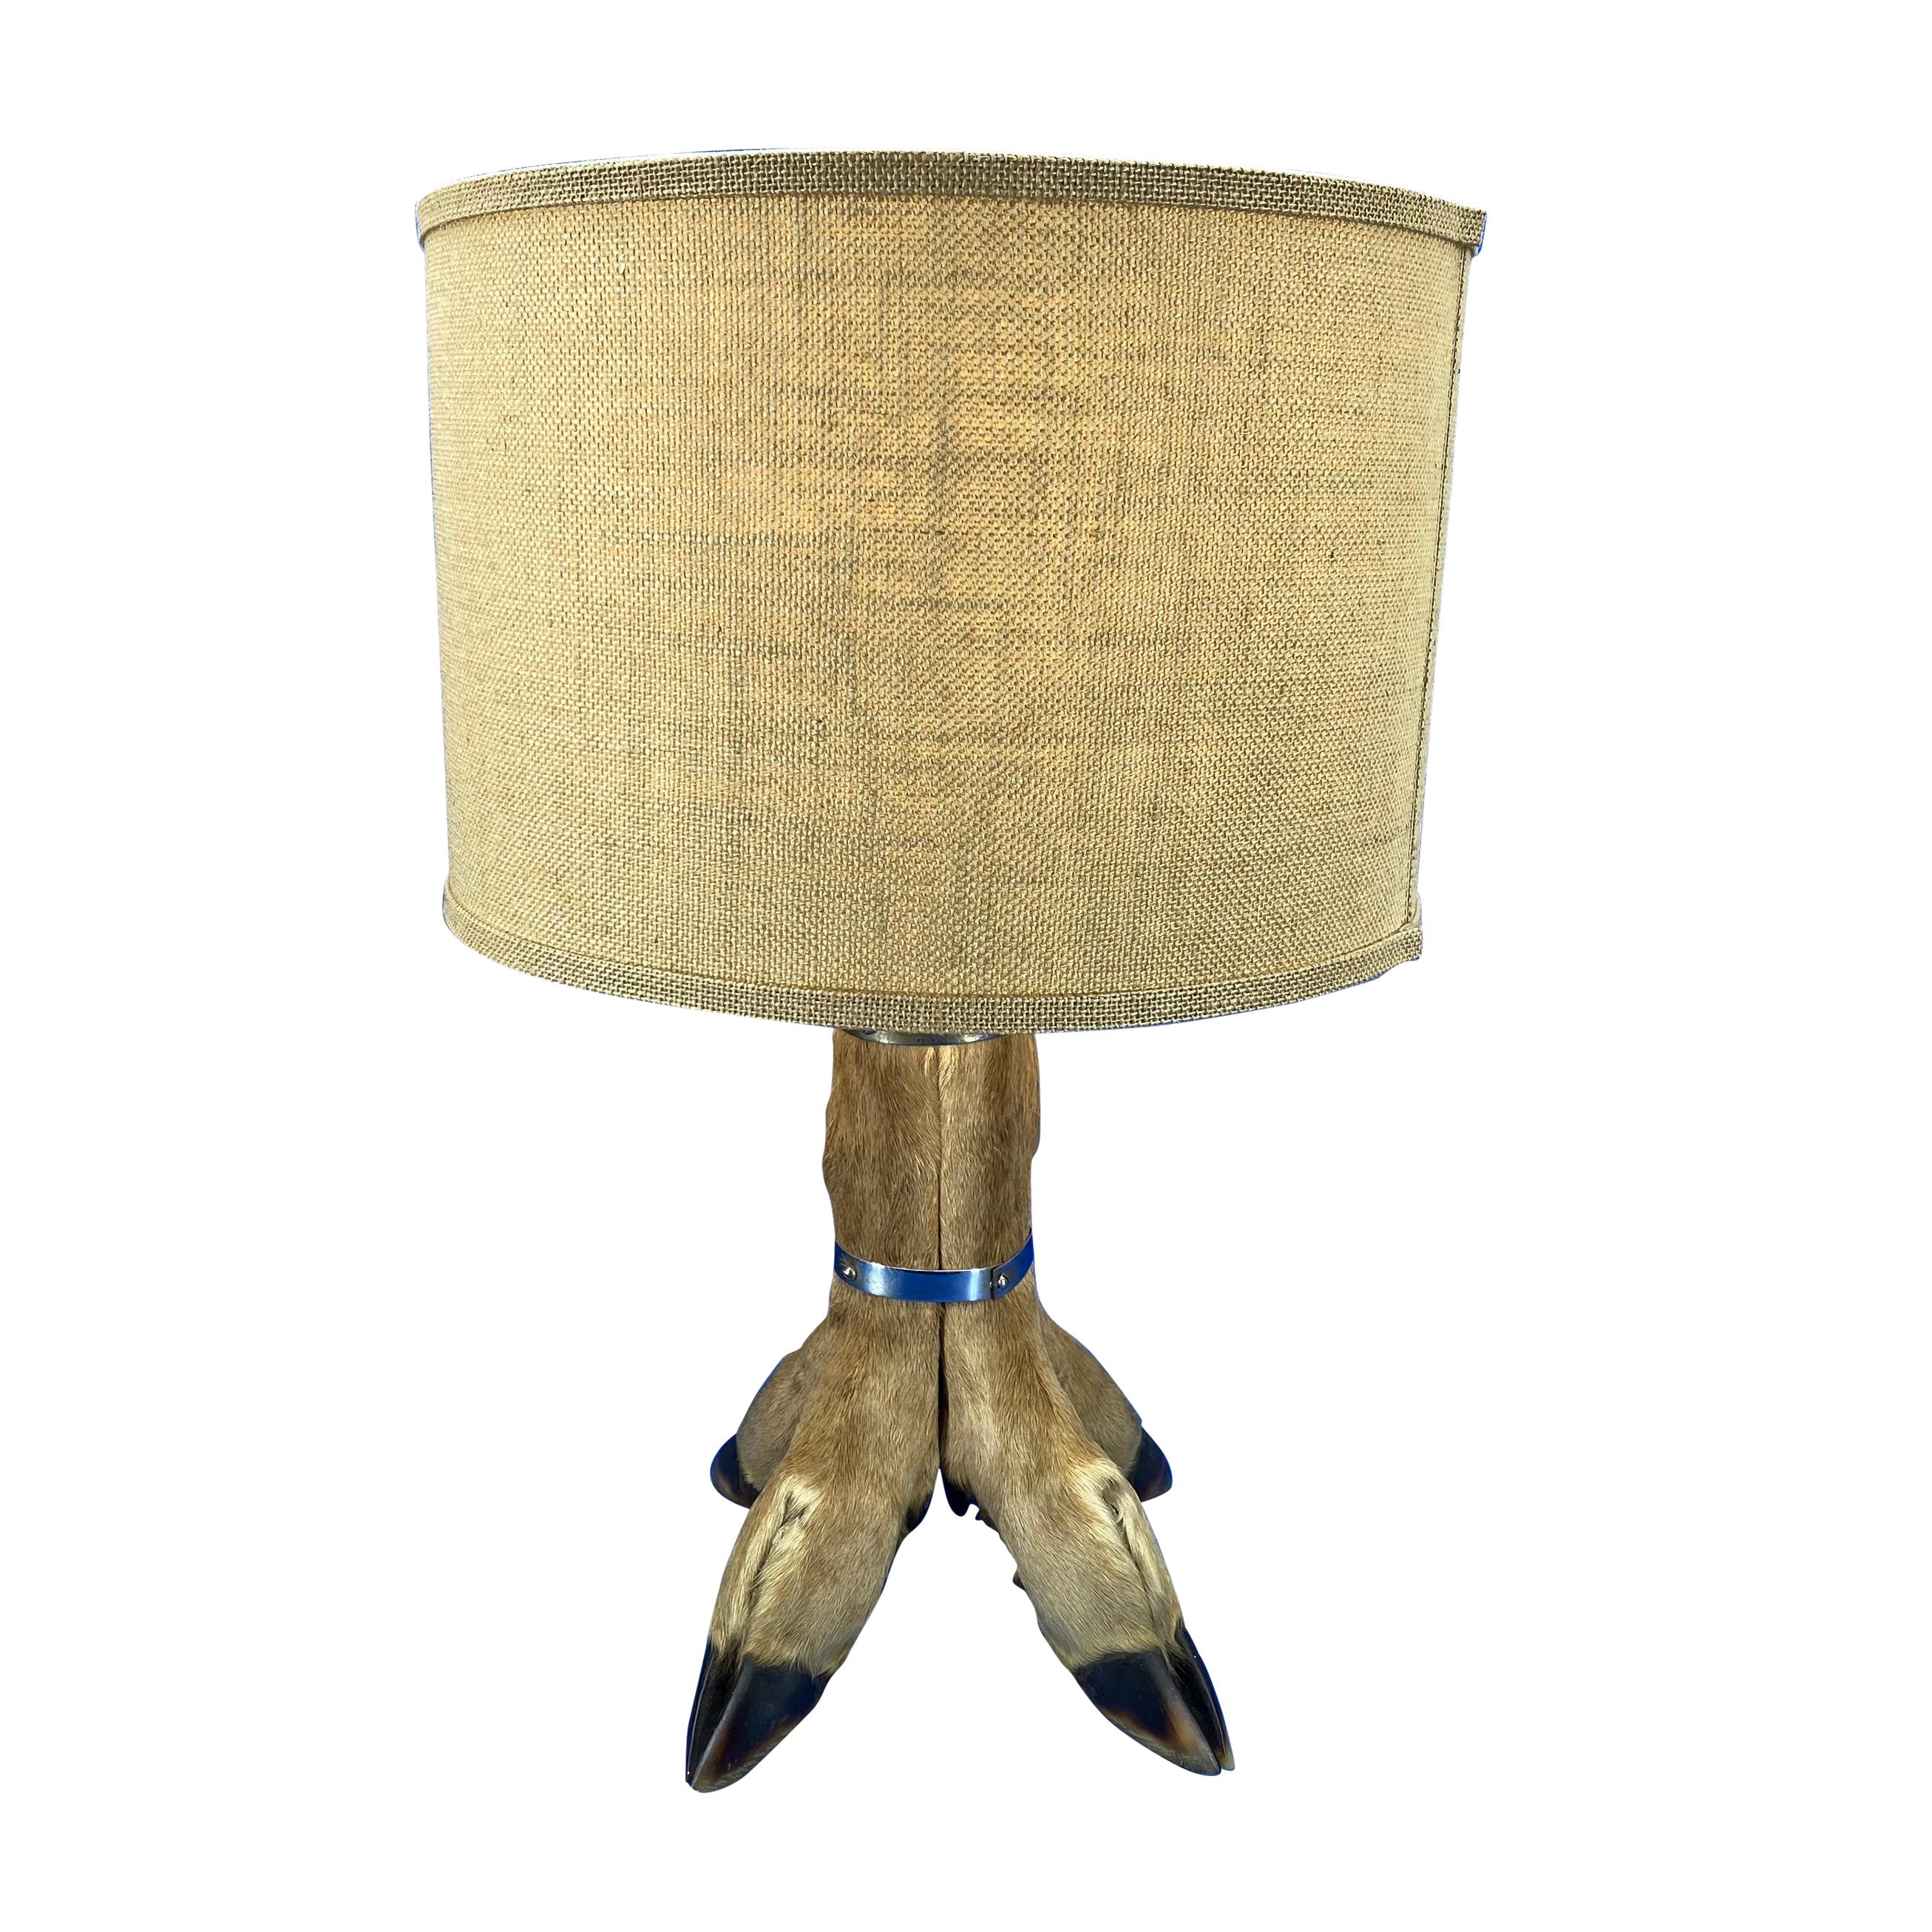 Table Lamp With 4 Tier Deer Hoof With Nickel Bands And Antler Finial For Sale